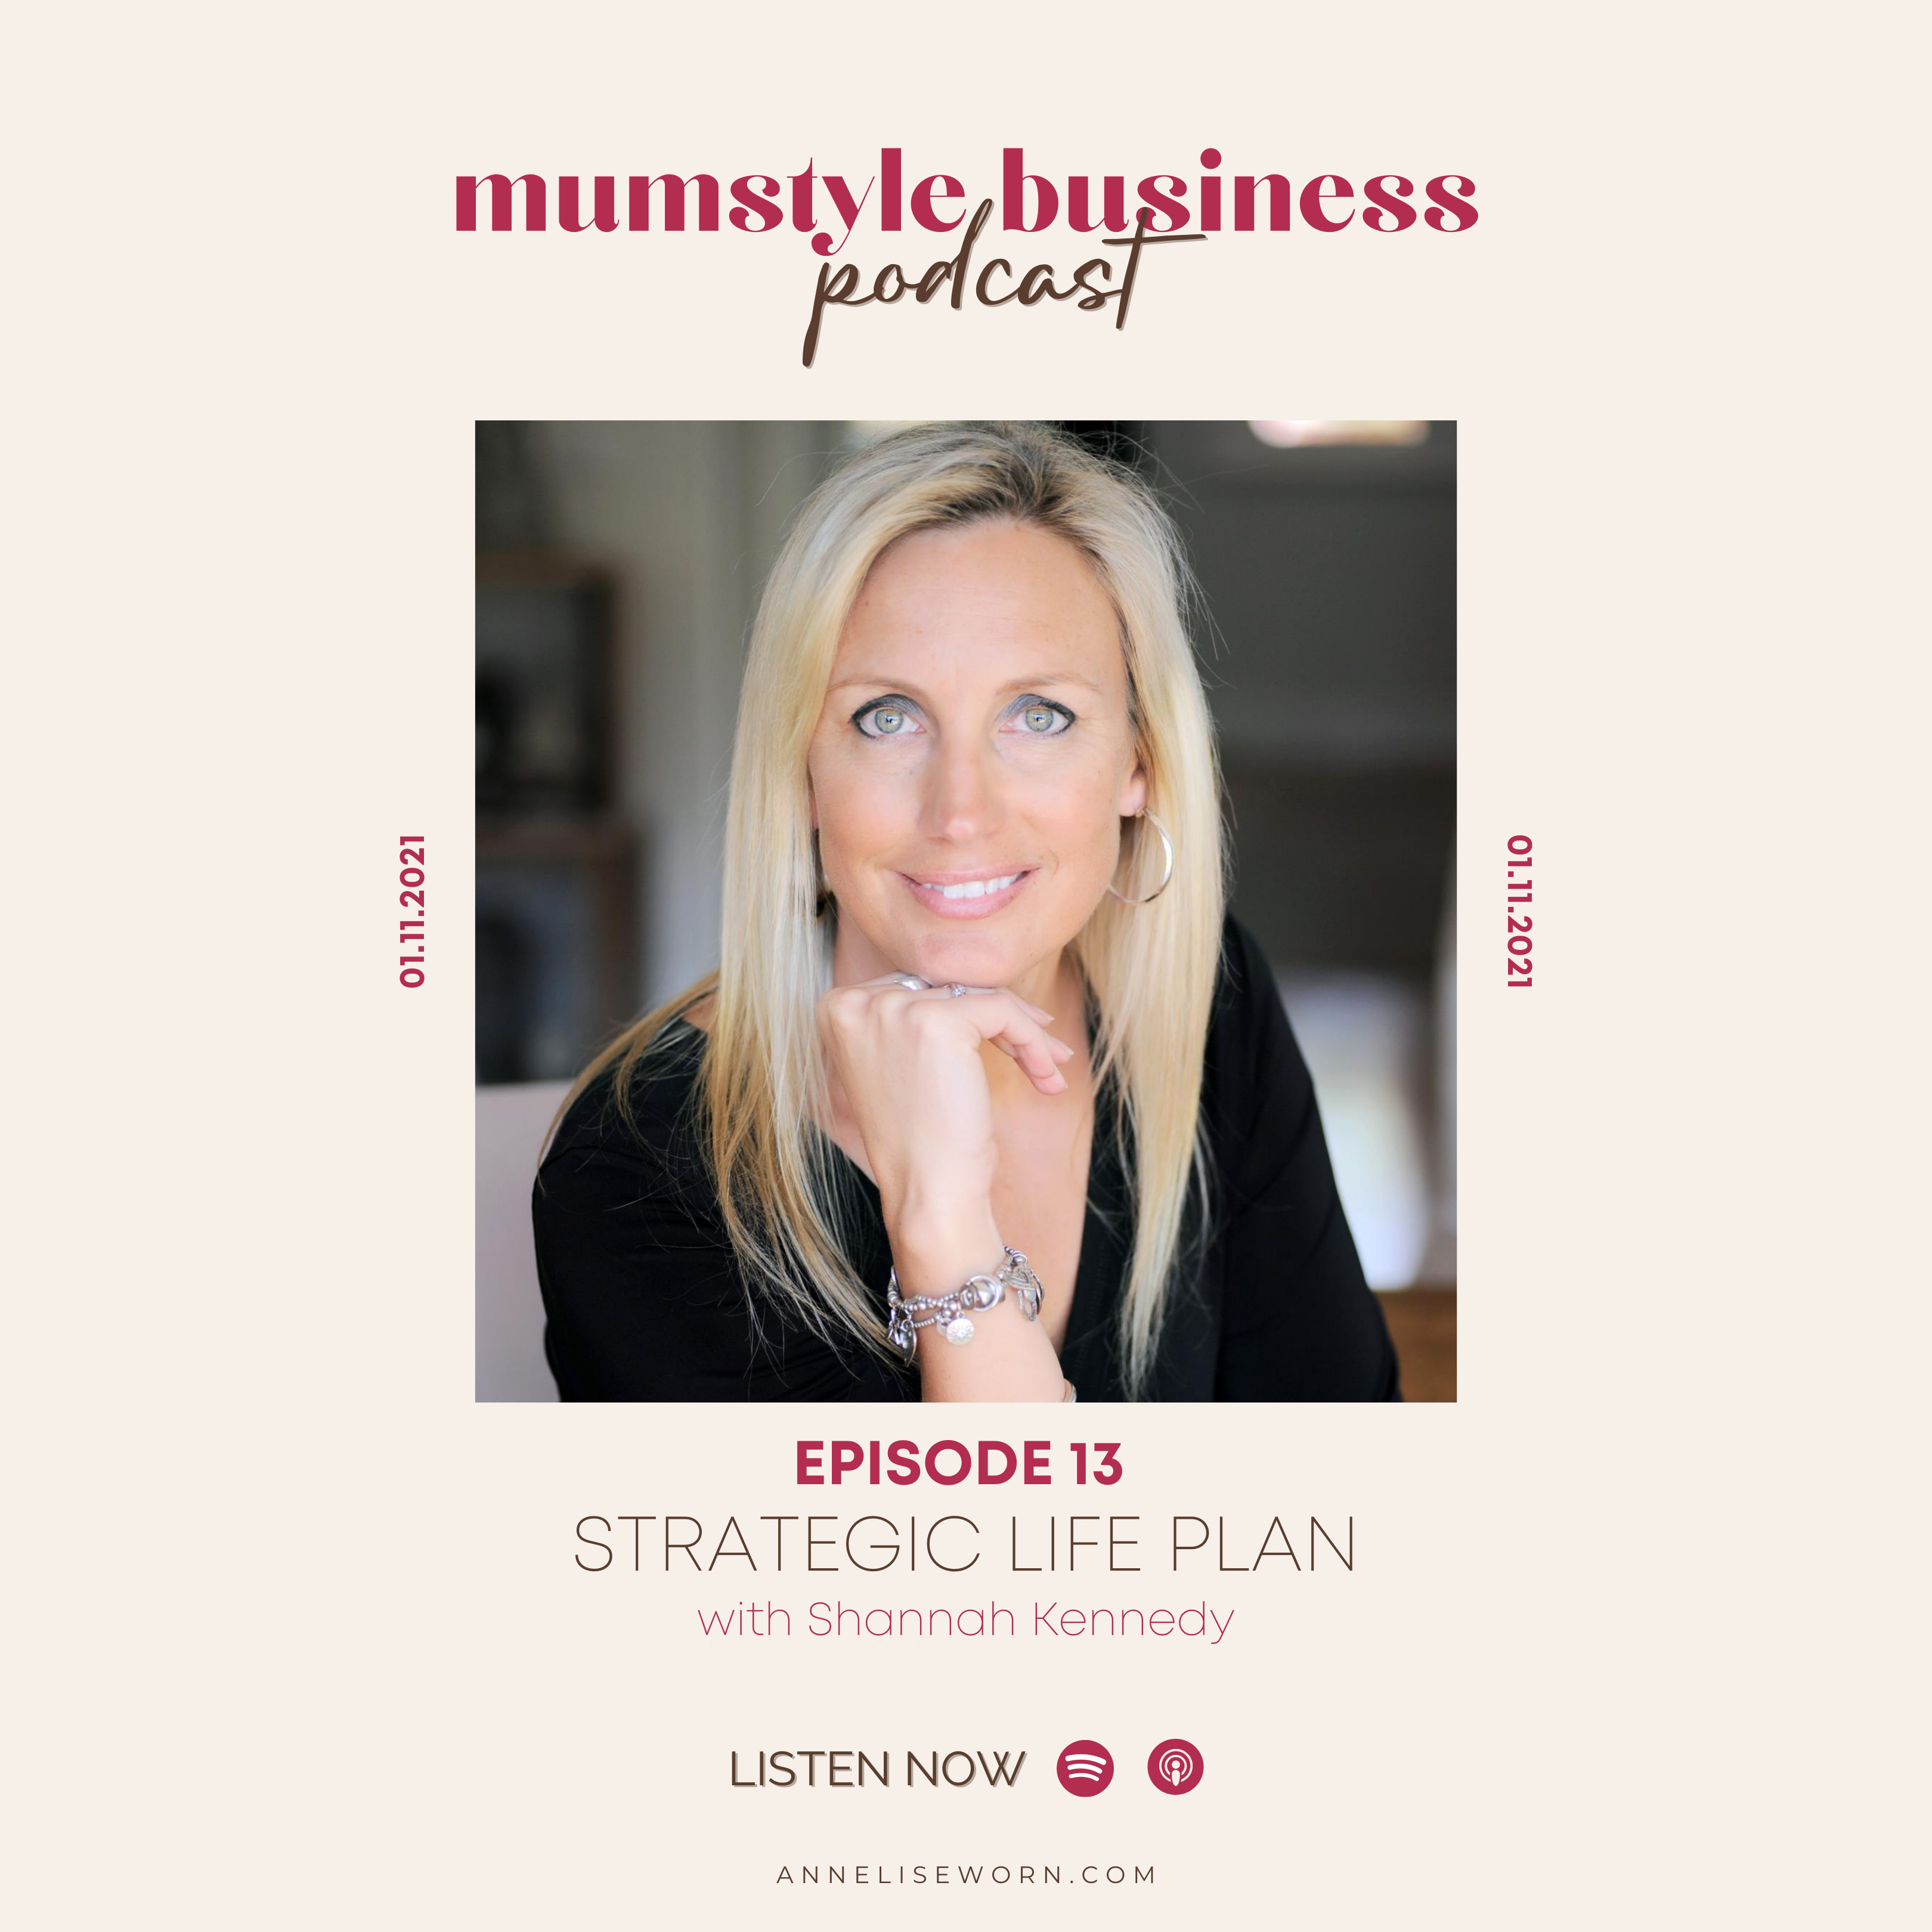 Featured image for “S2E13: Strategic Life Plan with Shannah Kennedy: Mumstyle Business Podcast”